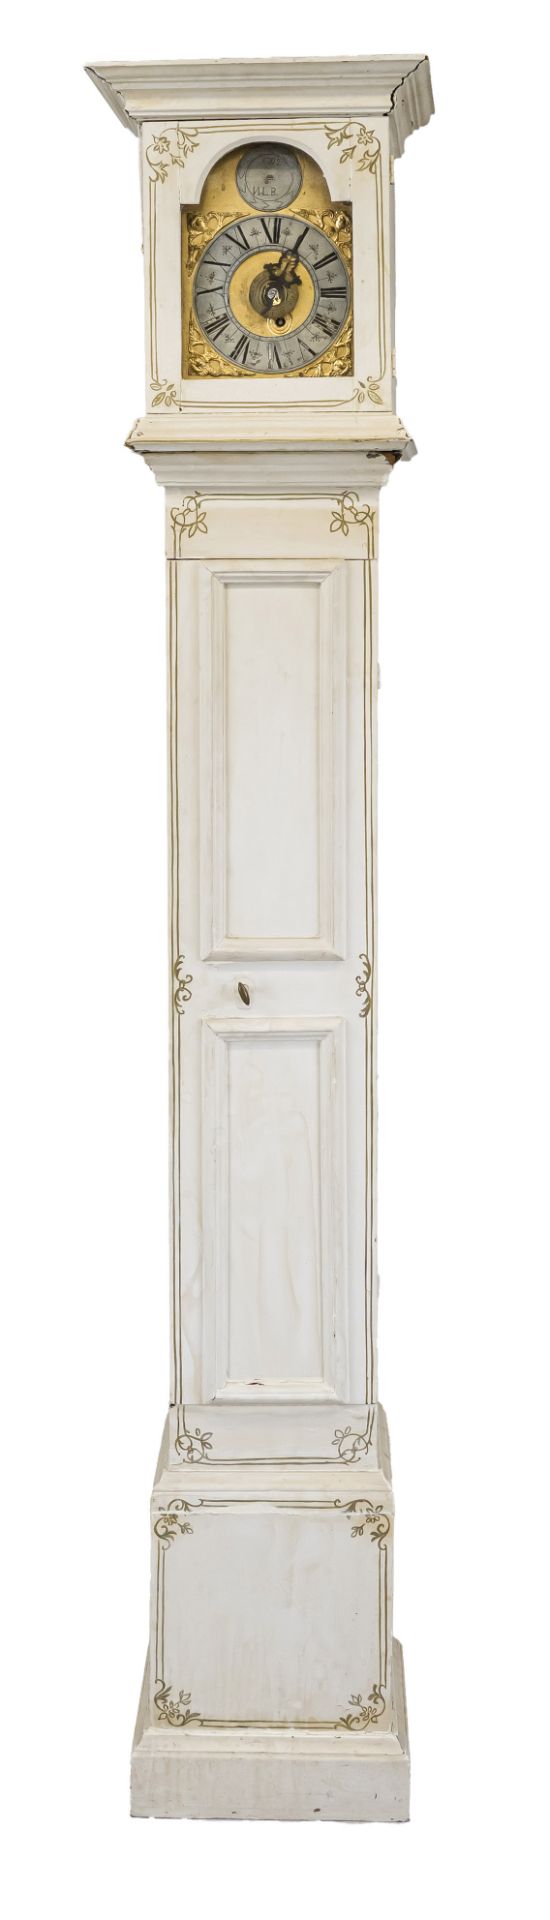 Slim grandfather clock, white with painted gold frame, dial marked ''1702 N.L.B.'', gilded wooden